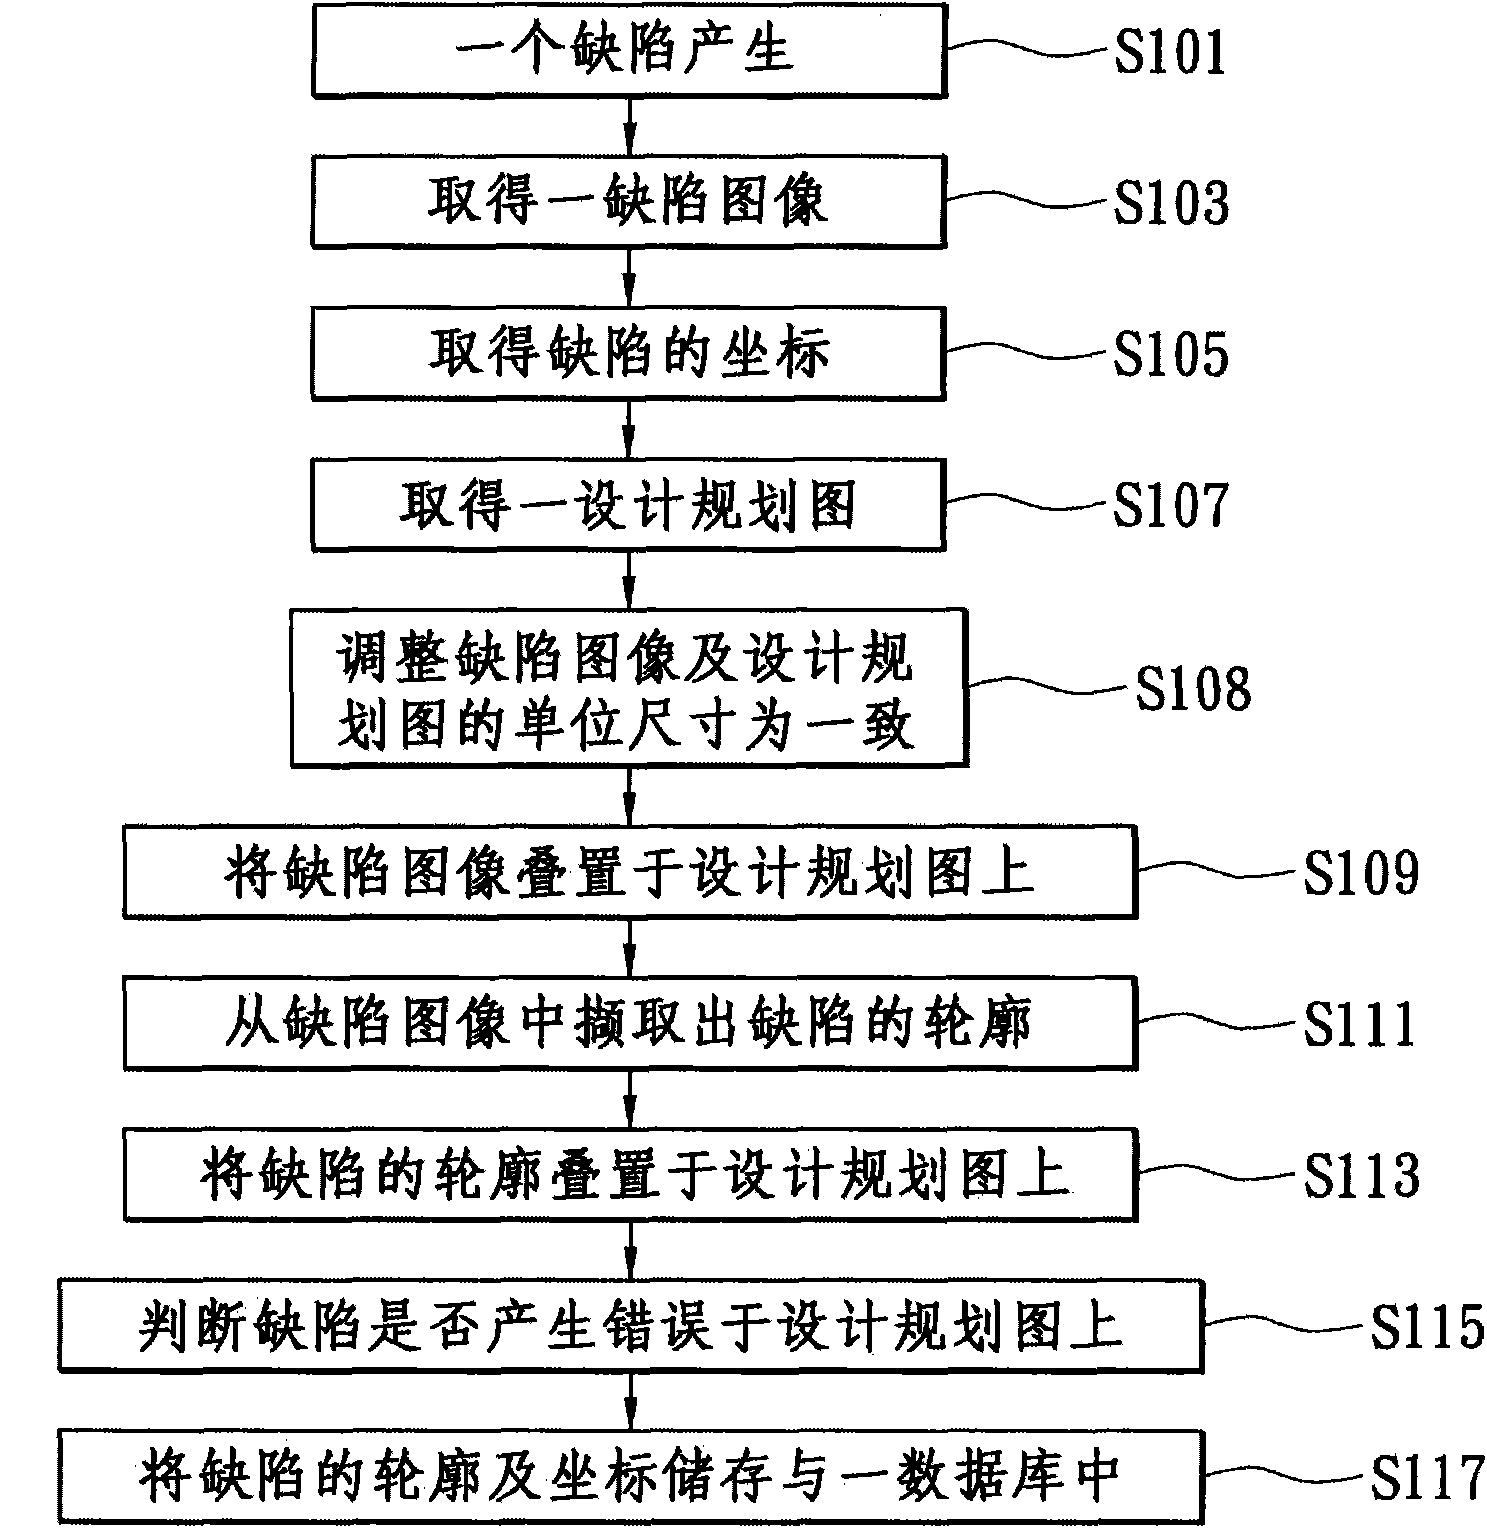 Application method of object manufacture defect